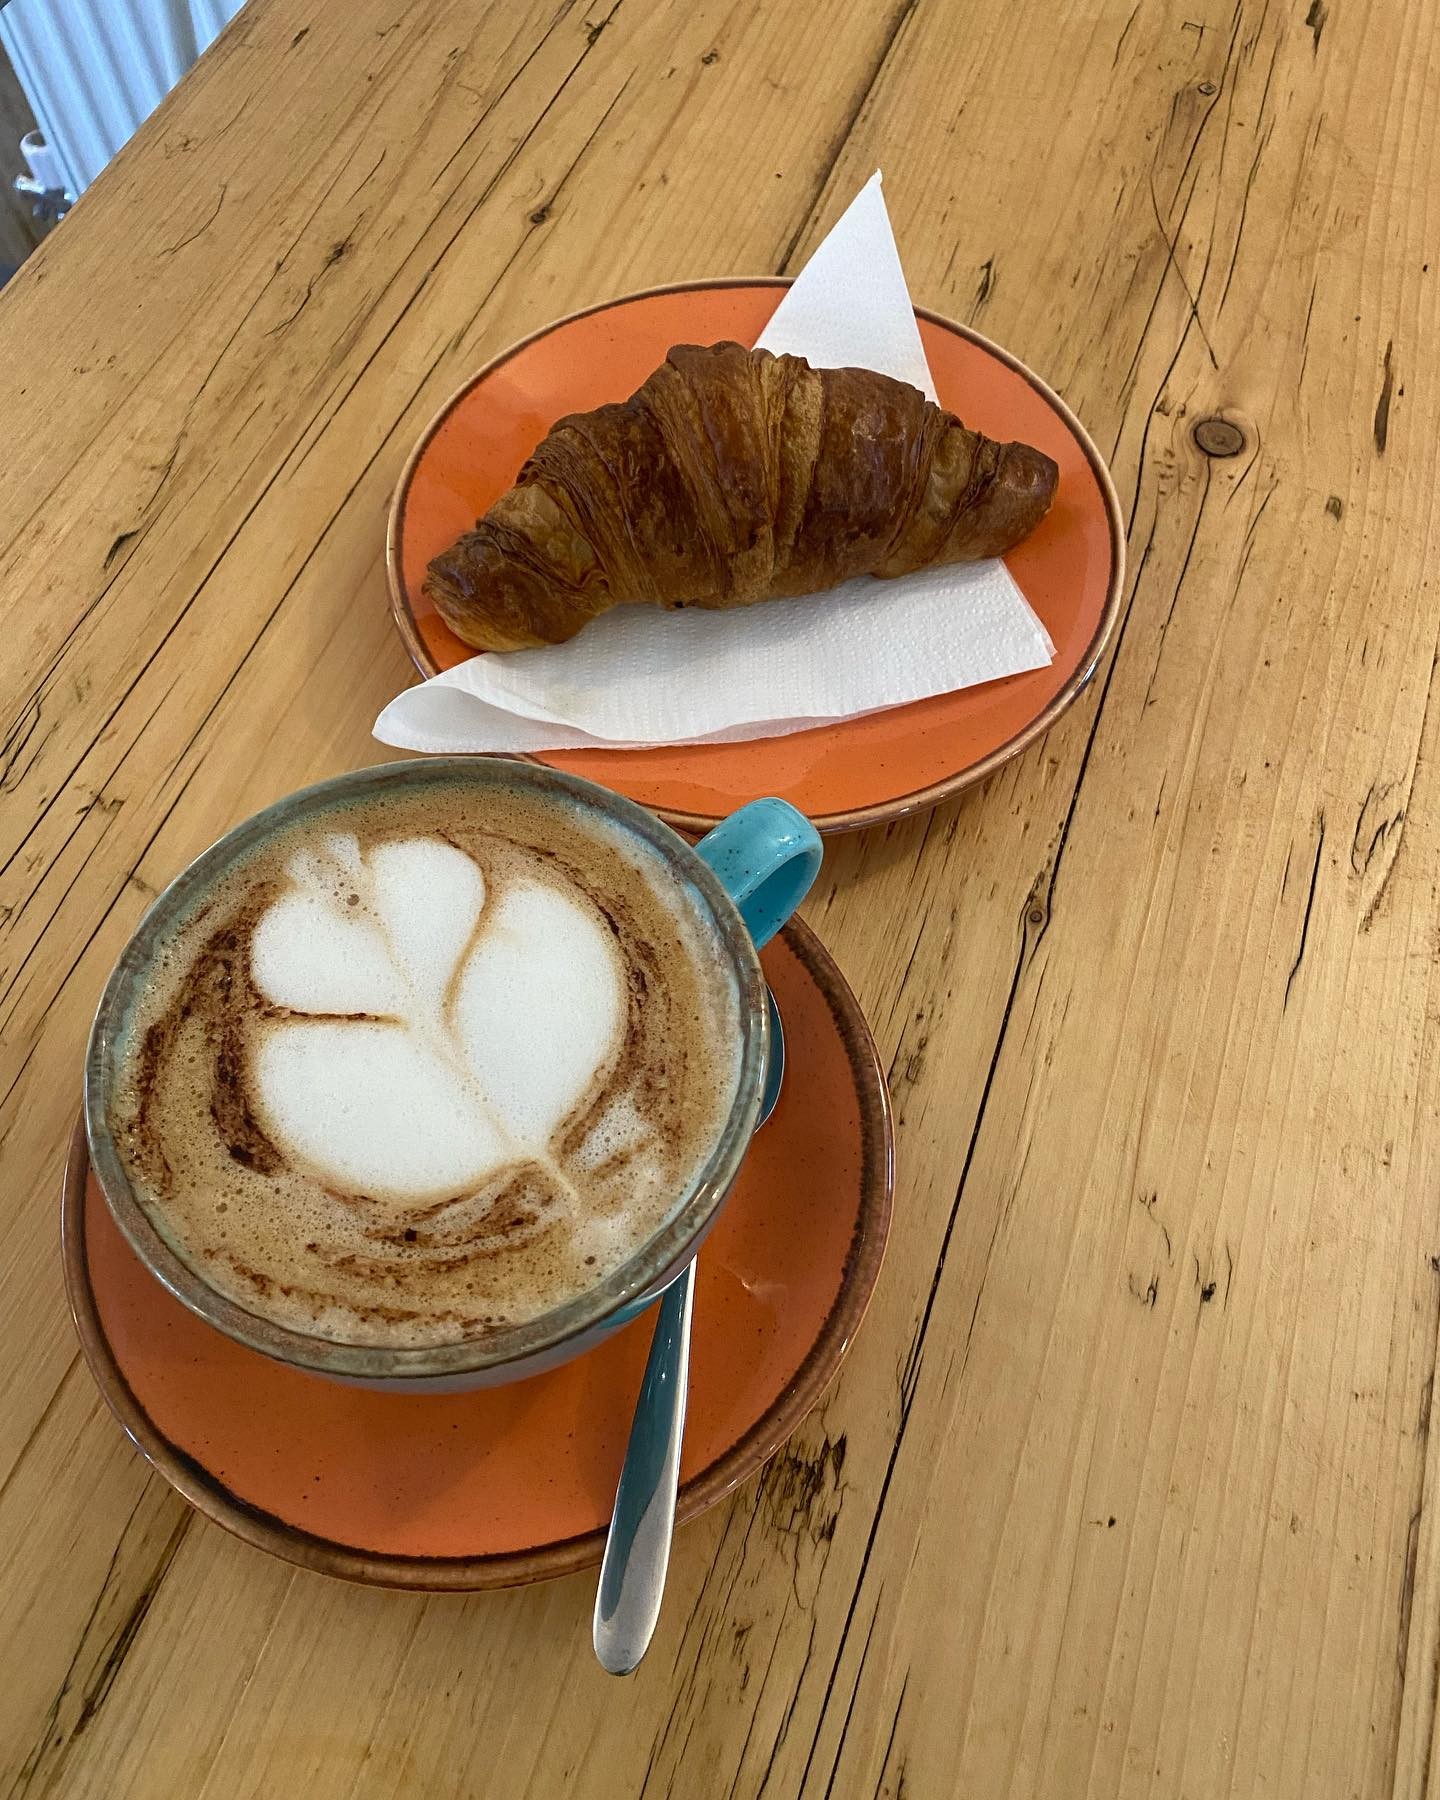 Come and join us on this chilly Sunday morning for a hot drink and freshly baked croissants 🥐 ☕️ #headlandsfarmfishery #headlandsfarmcoffeeshop #westwellow #freshpastries #hotcoffee☕